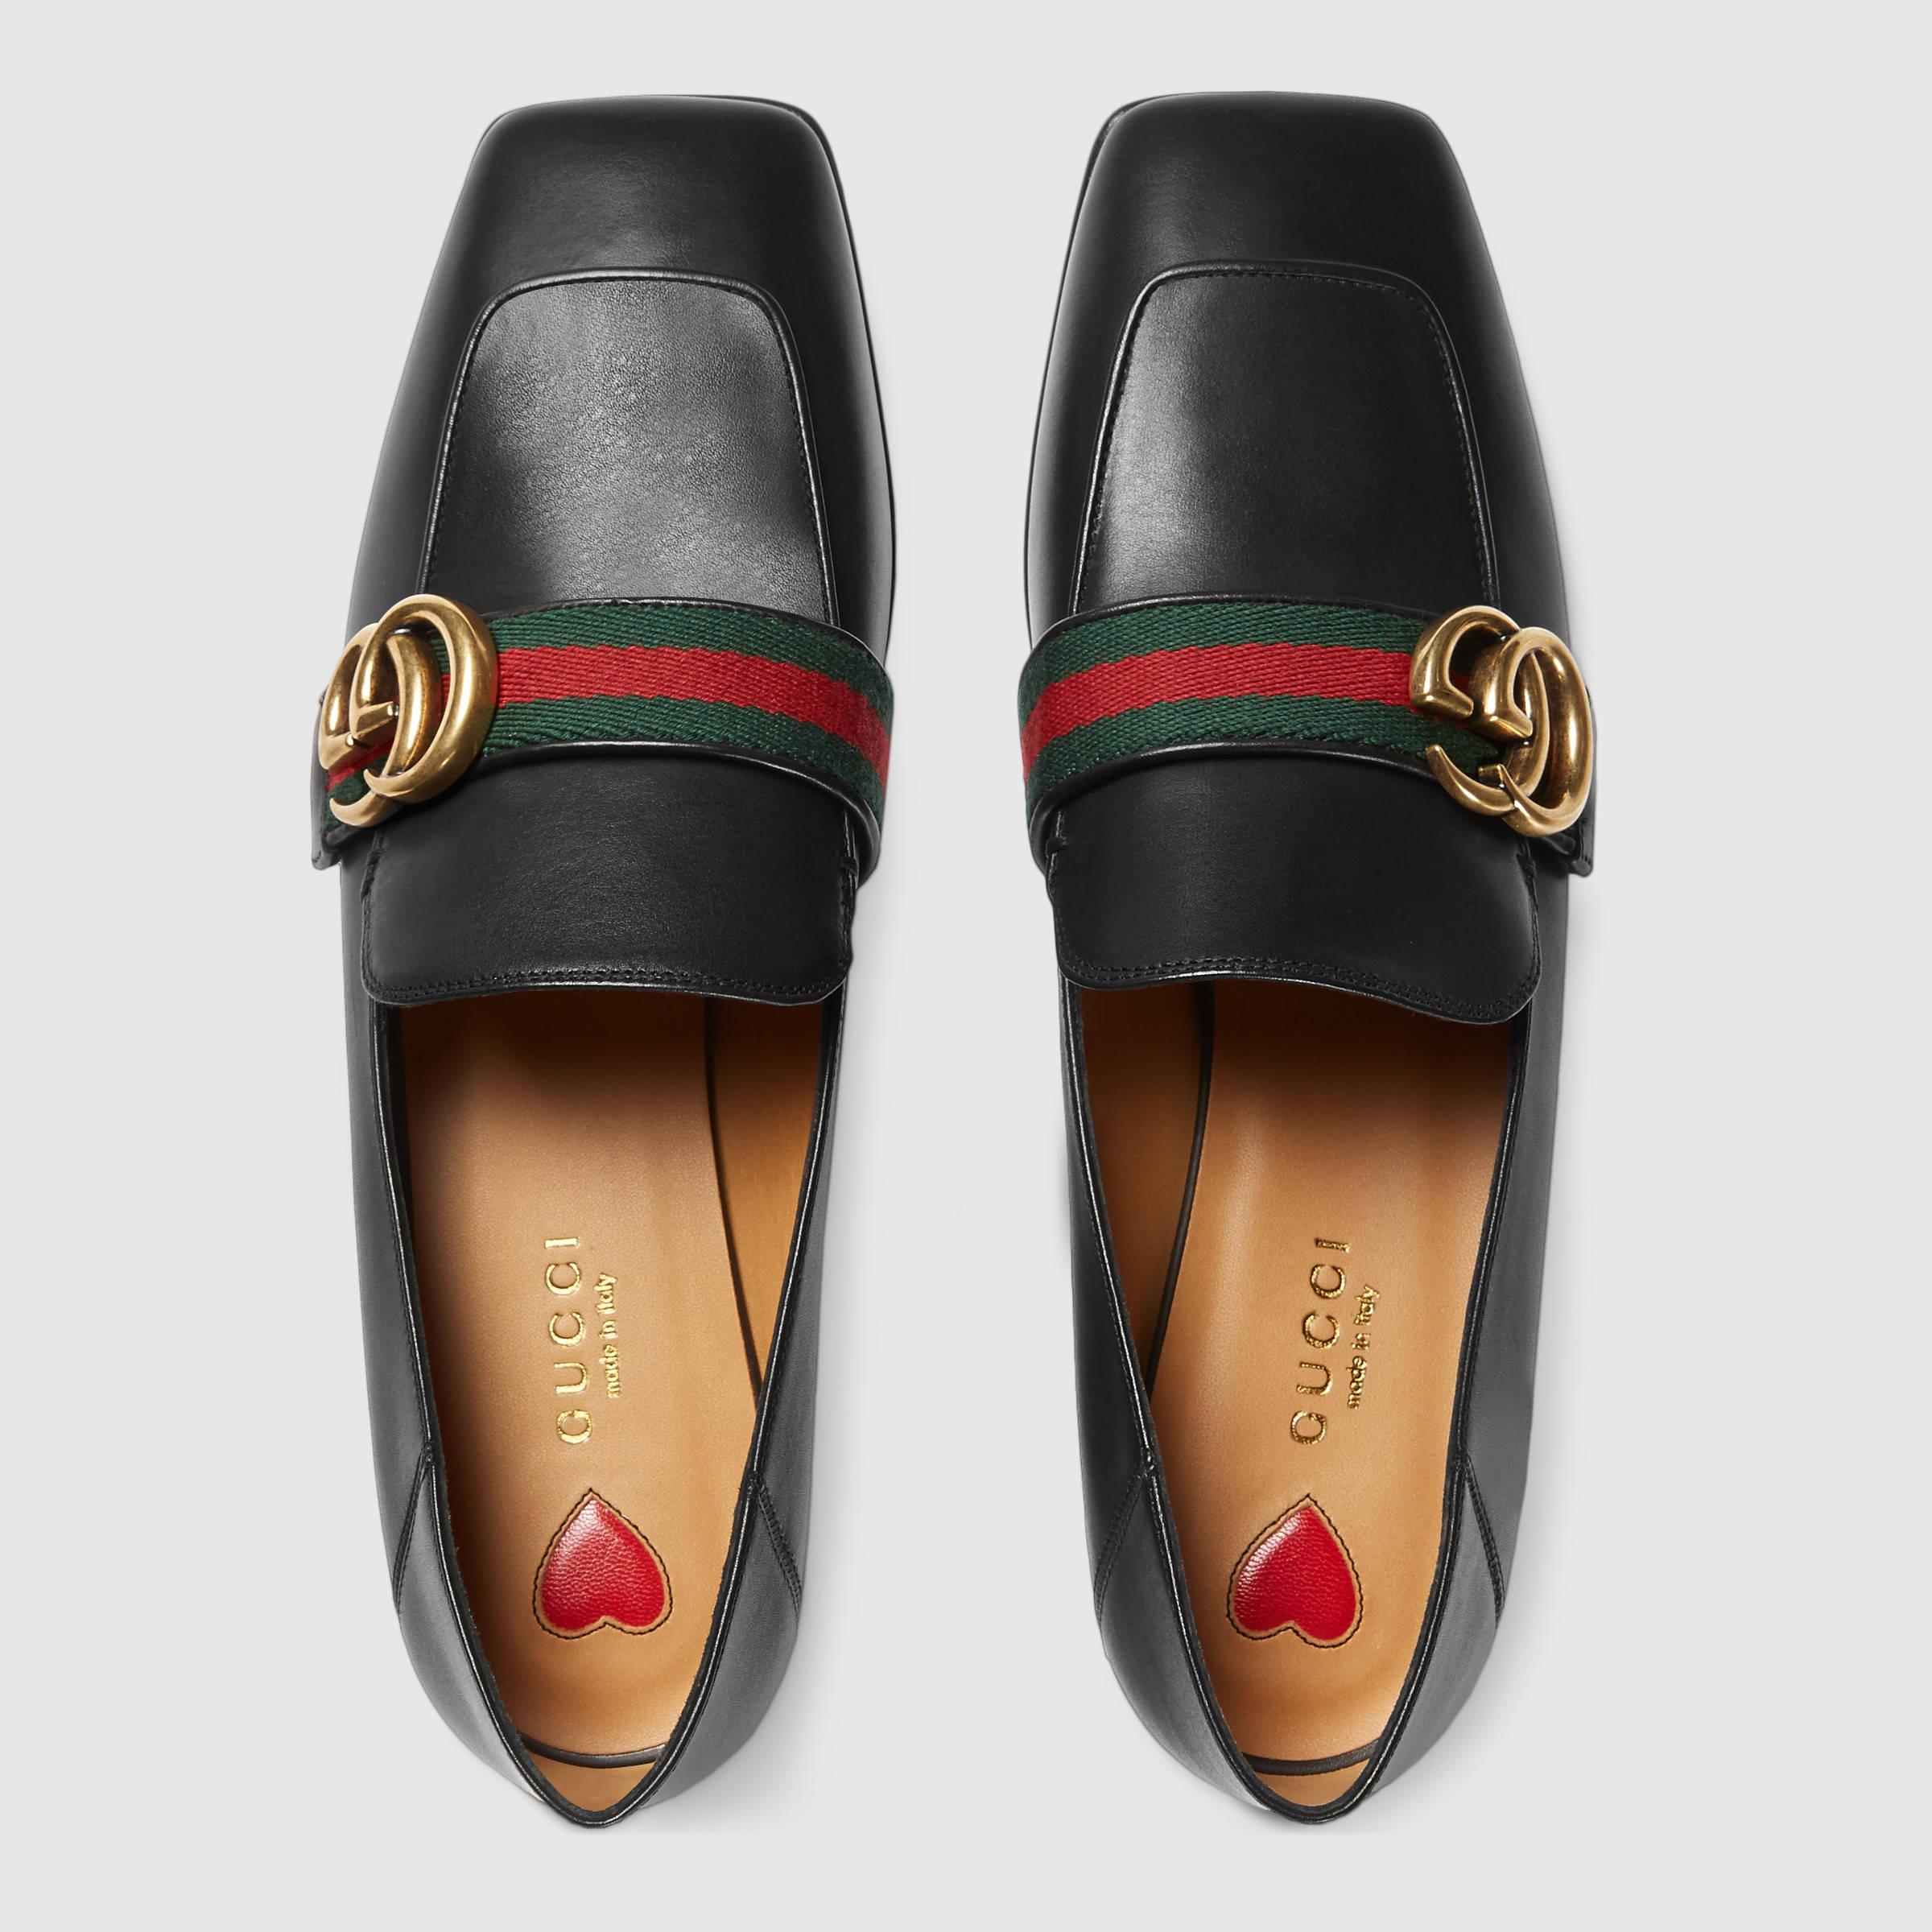 gucci double g shoes